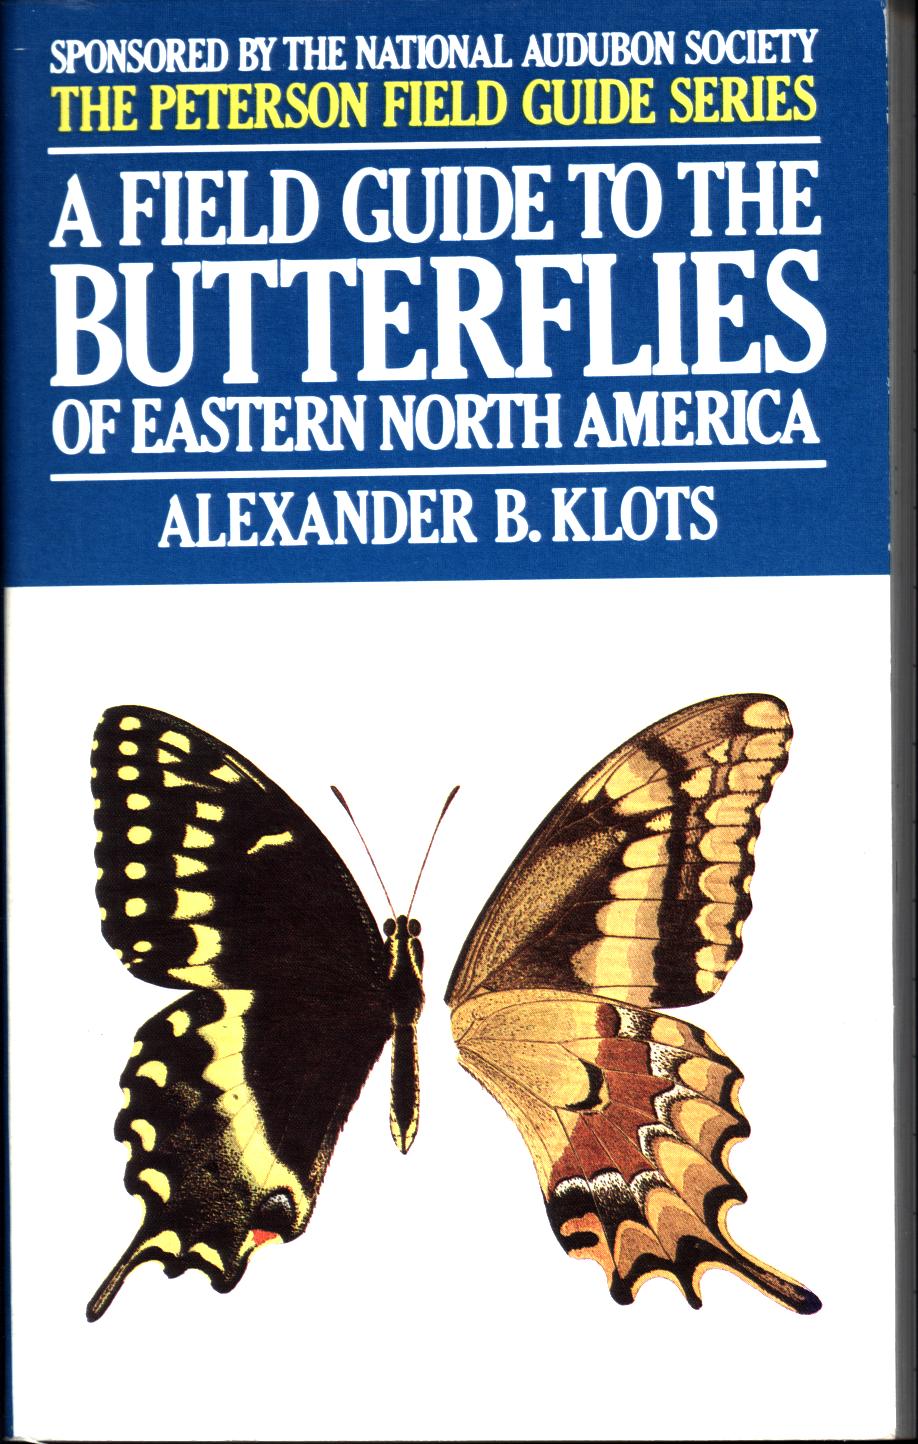 A FIELD GUIDE TO THE BUTTERFLIES OF EASTERN NORTH AMERICA. 